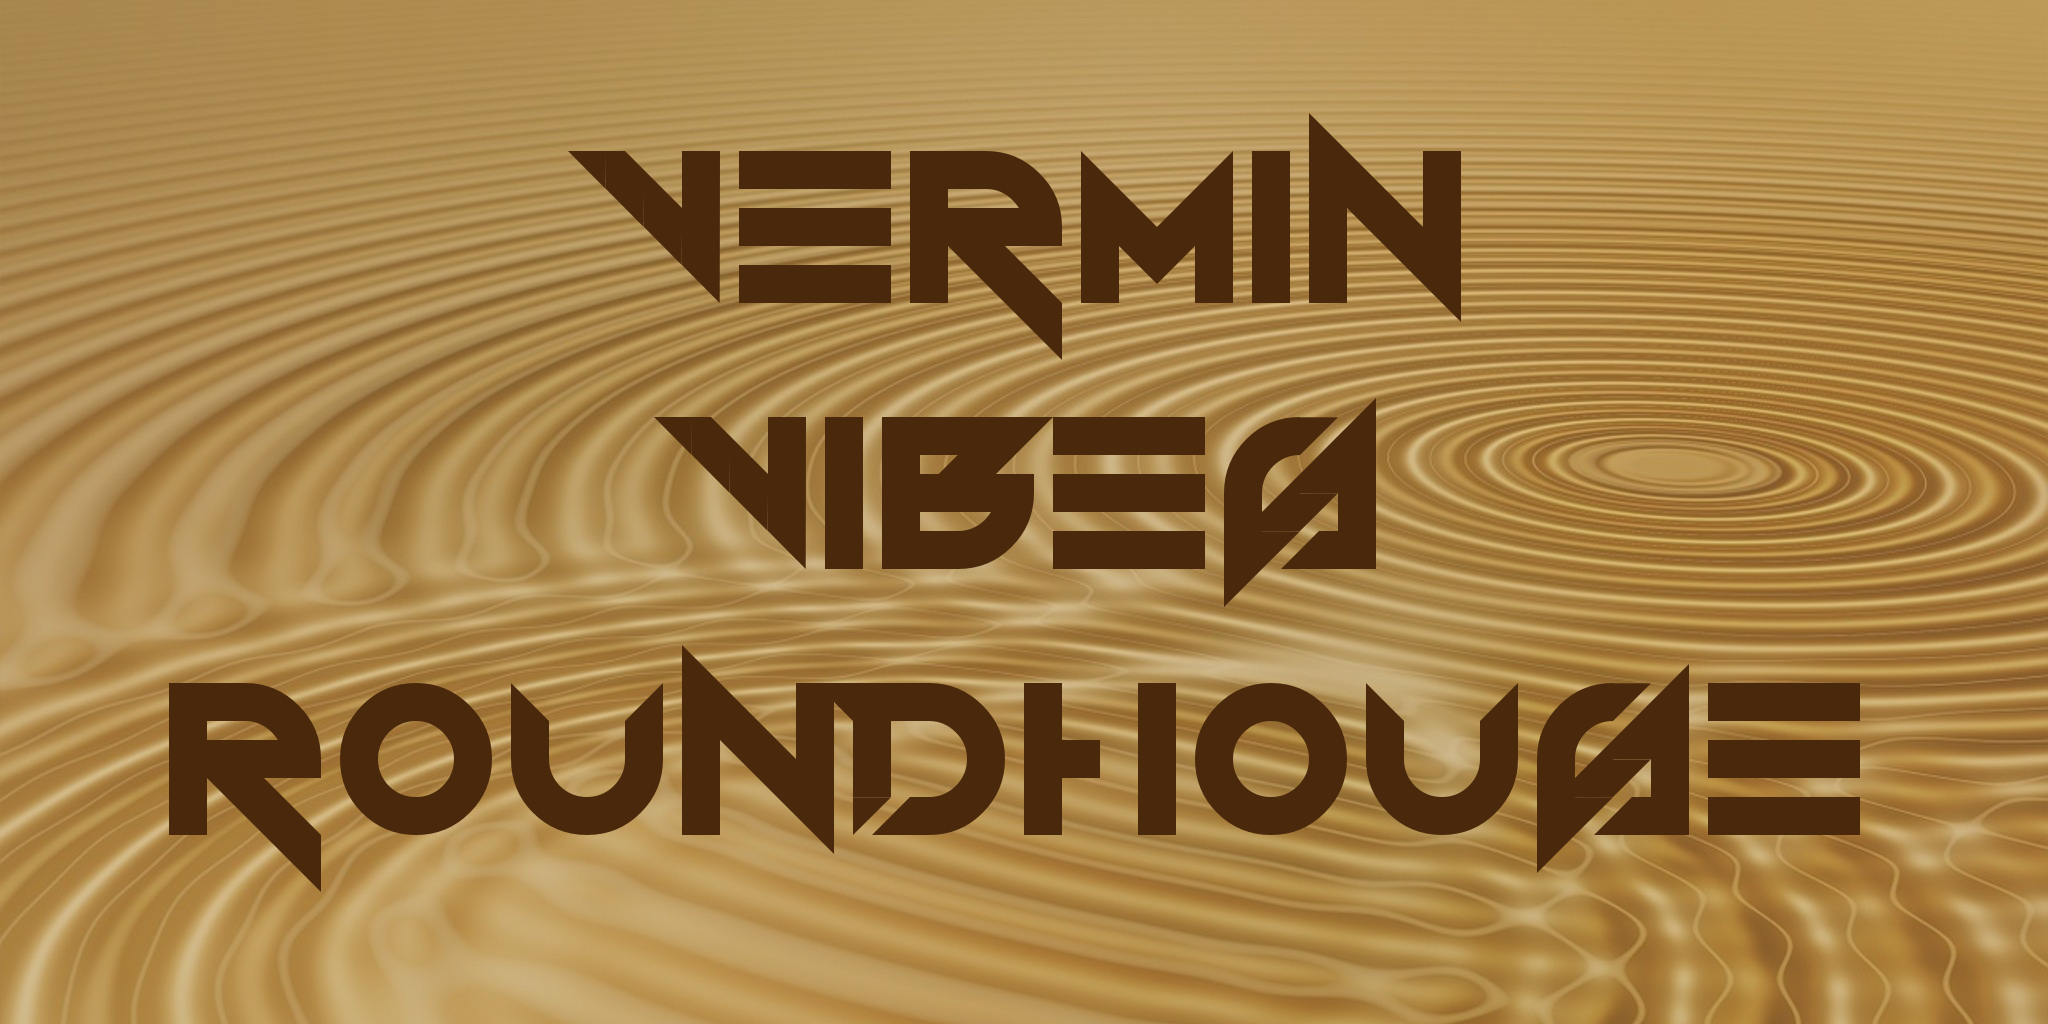 Vermin Vibes Roundhouse